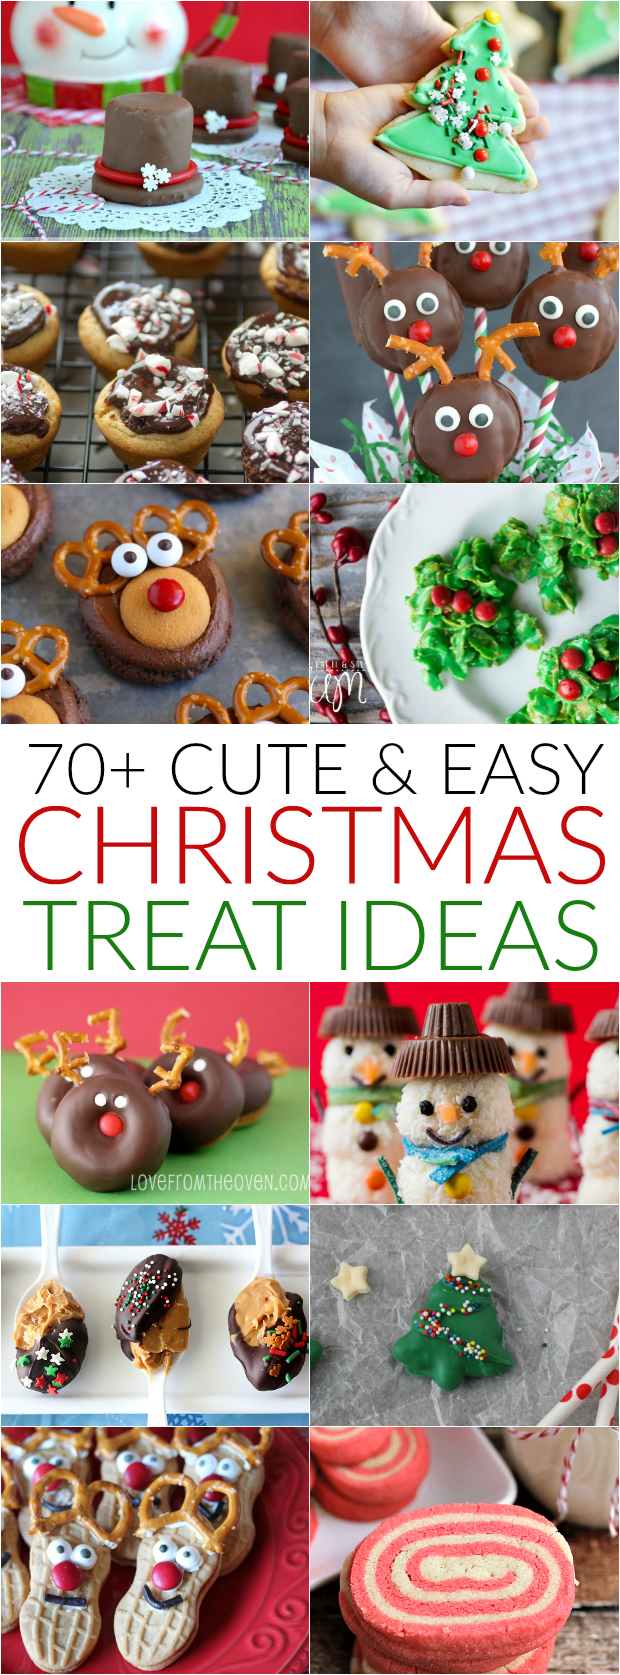 70+ Christmas Treats -   14 holiday desserts For Kids ideas